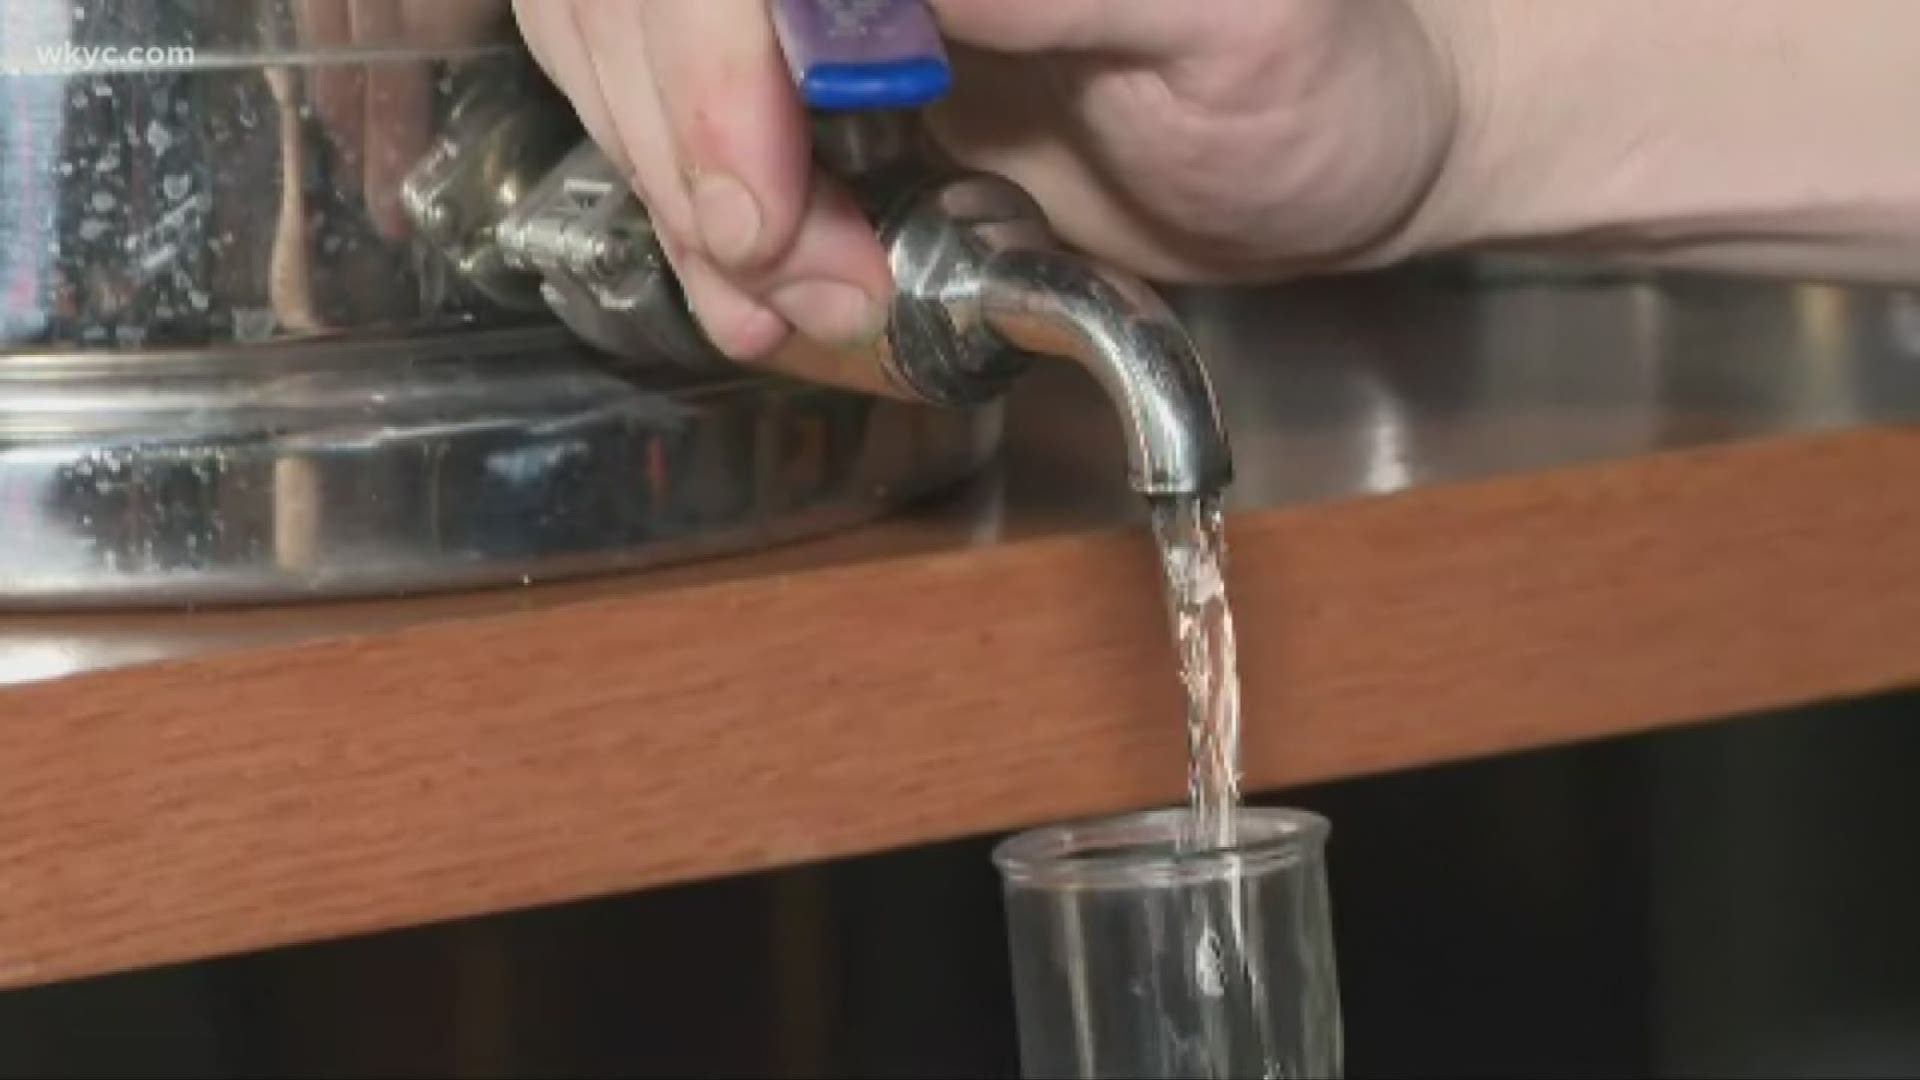 March 26, 2020: With hand sanitizer in short supply across the country, Western Reserve Distillers in Lakewood is stepping up to help make some.